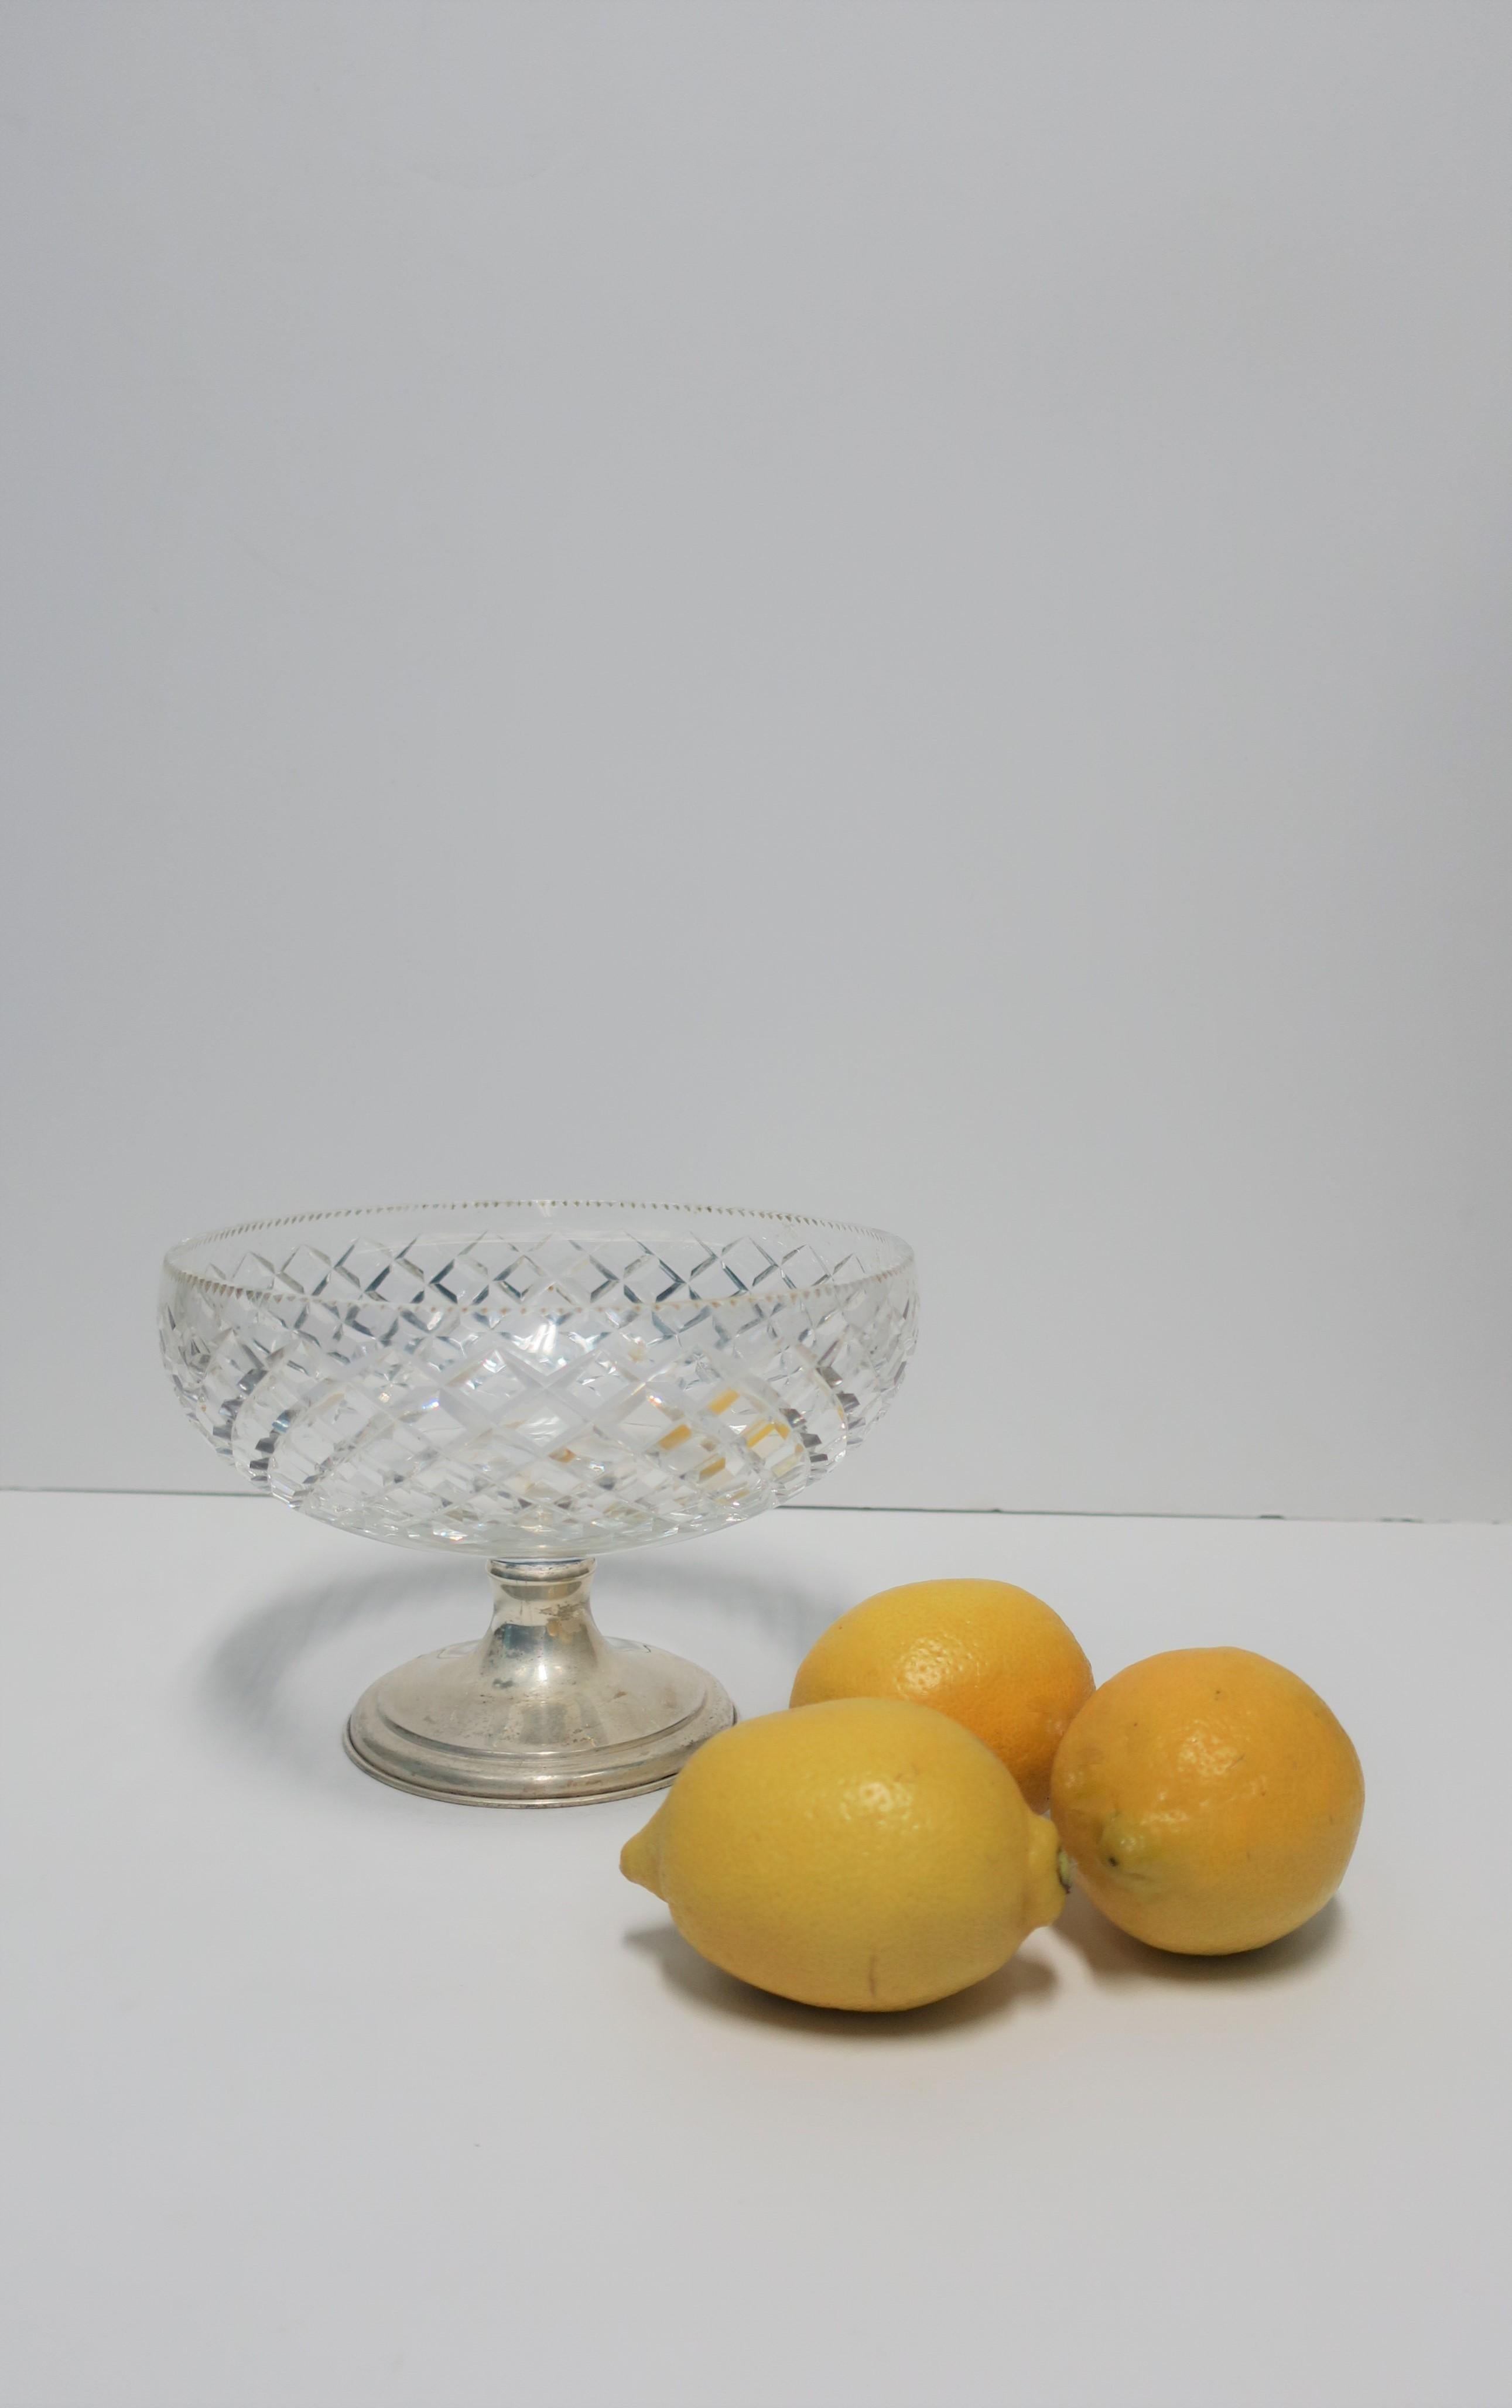 Sterling Silver and Crystal Compote or Footed Bowl by T. G. Hawkes & Co. In Good Condition For Sale In New York, NY